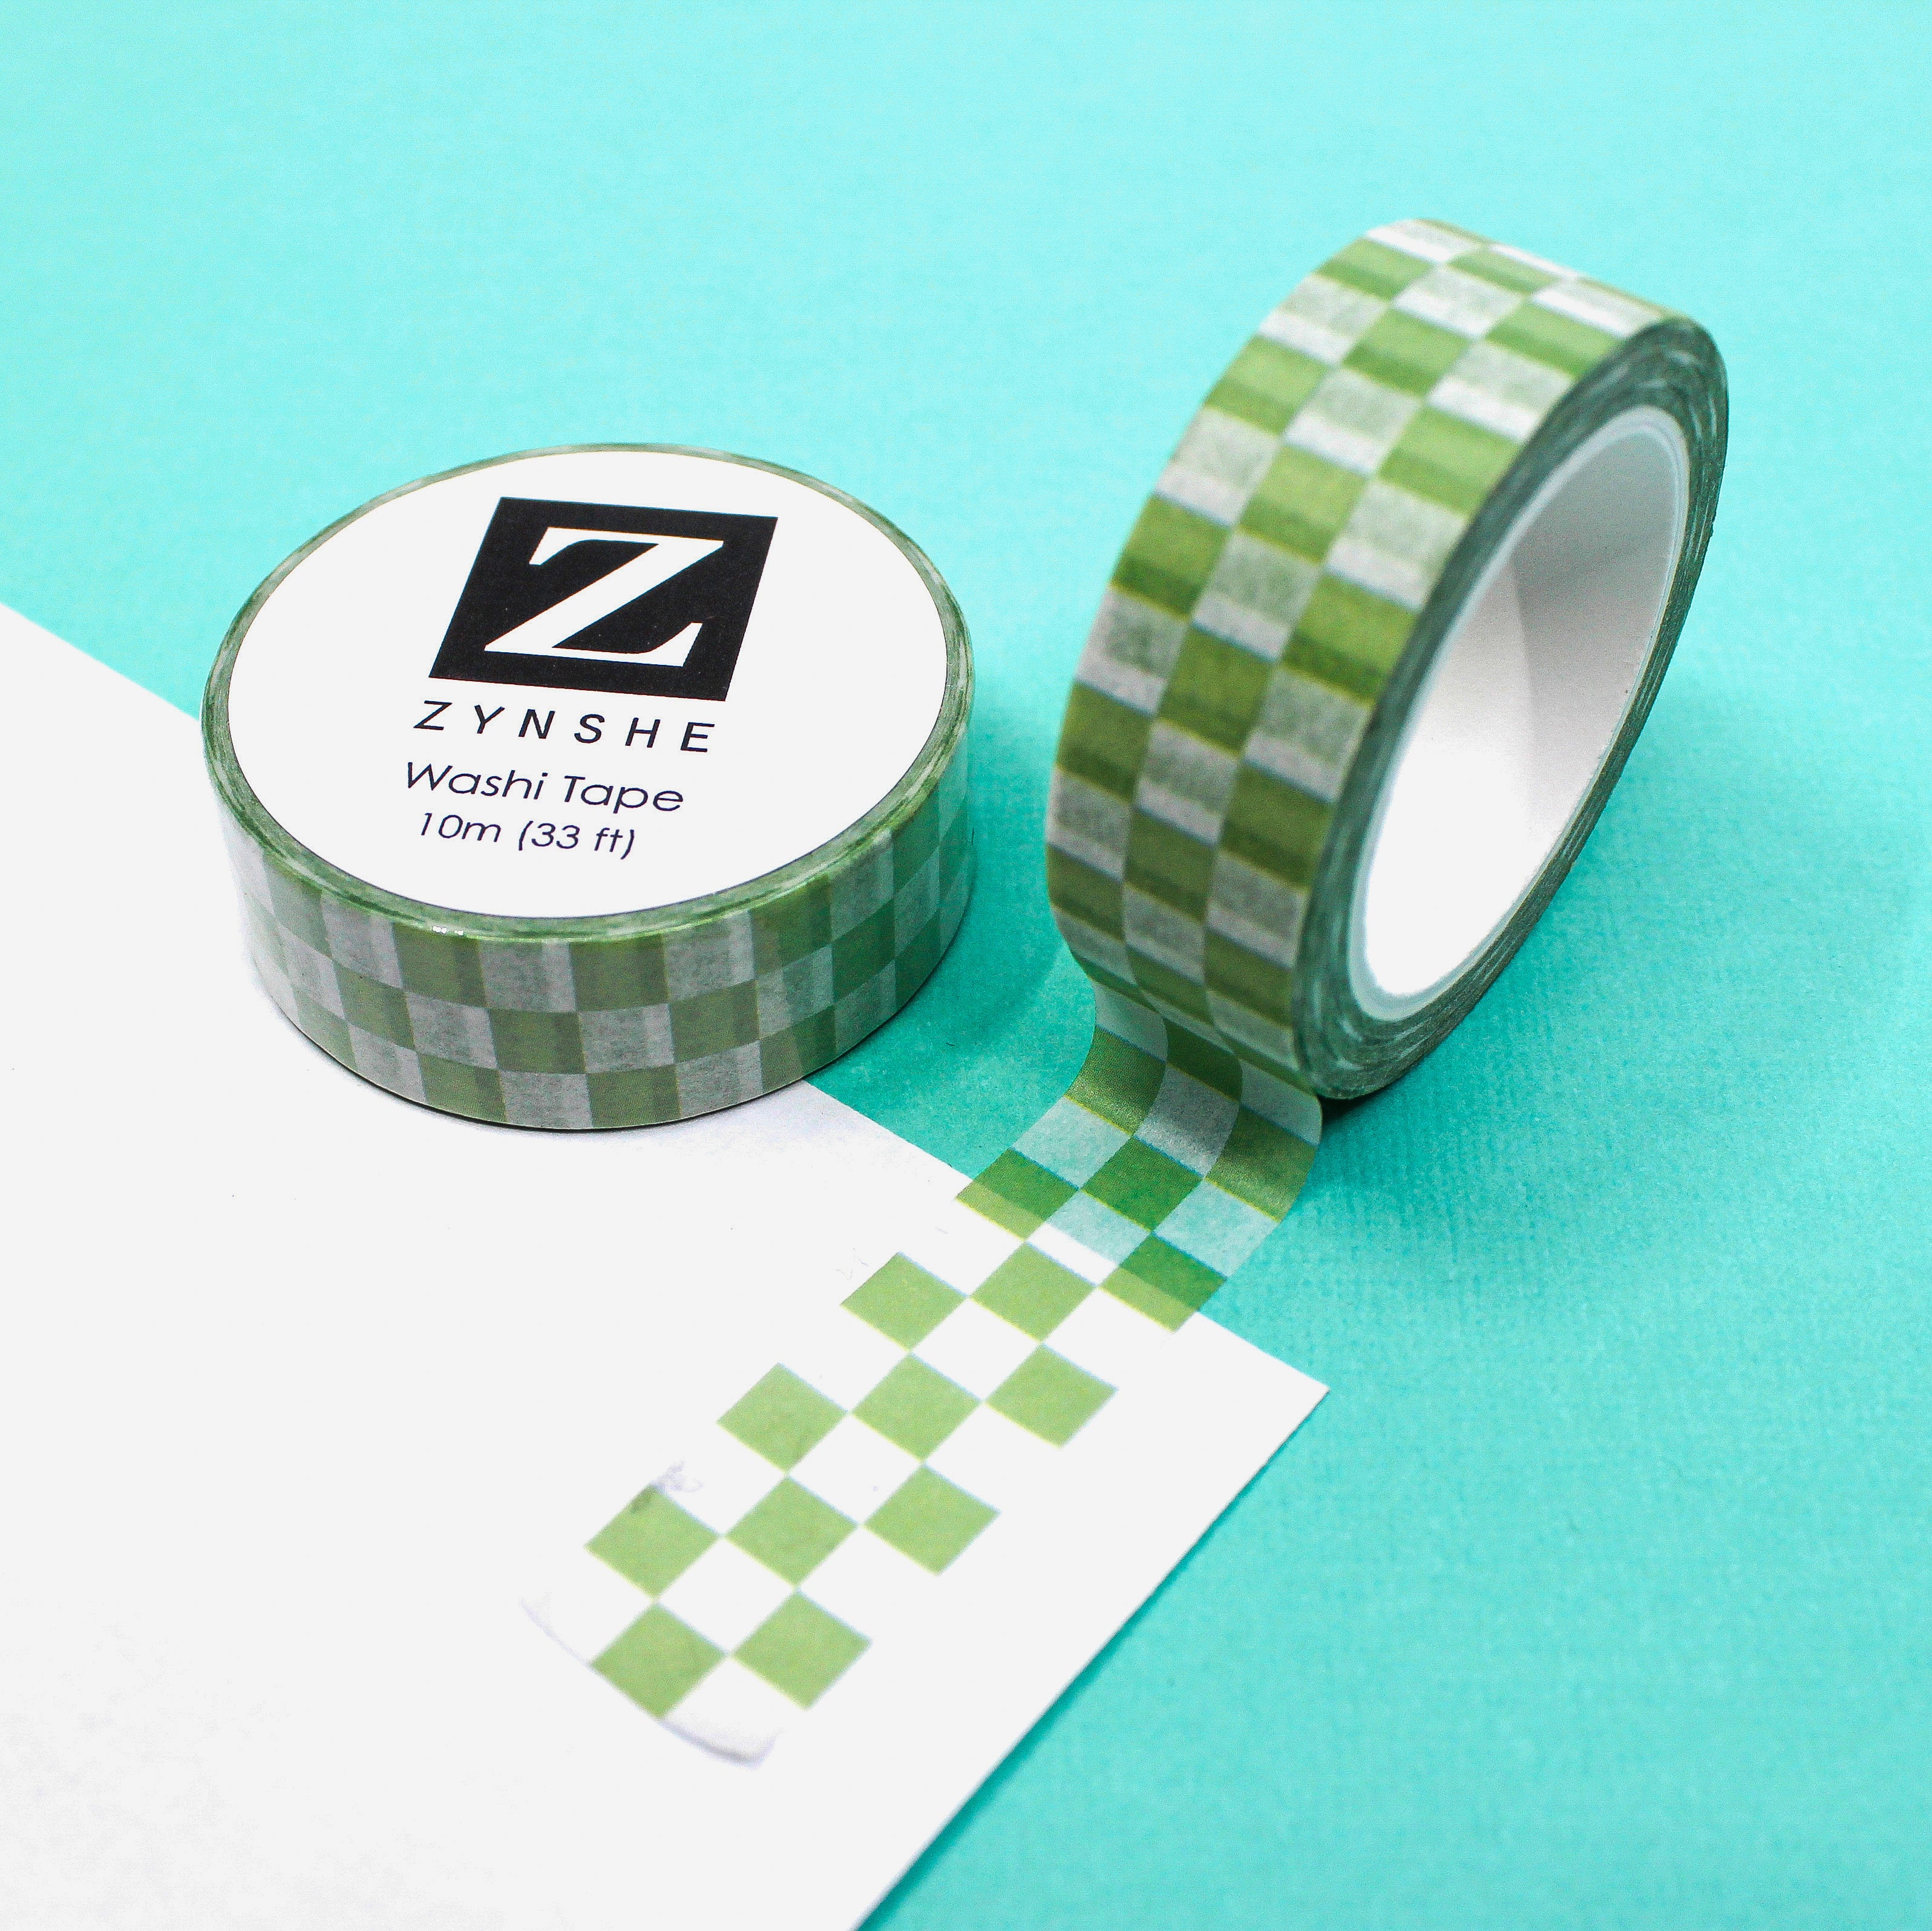 This is a green checkerboard view themed washi tape designed by Zynshe and available at BBB Supplies Craft Shop